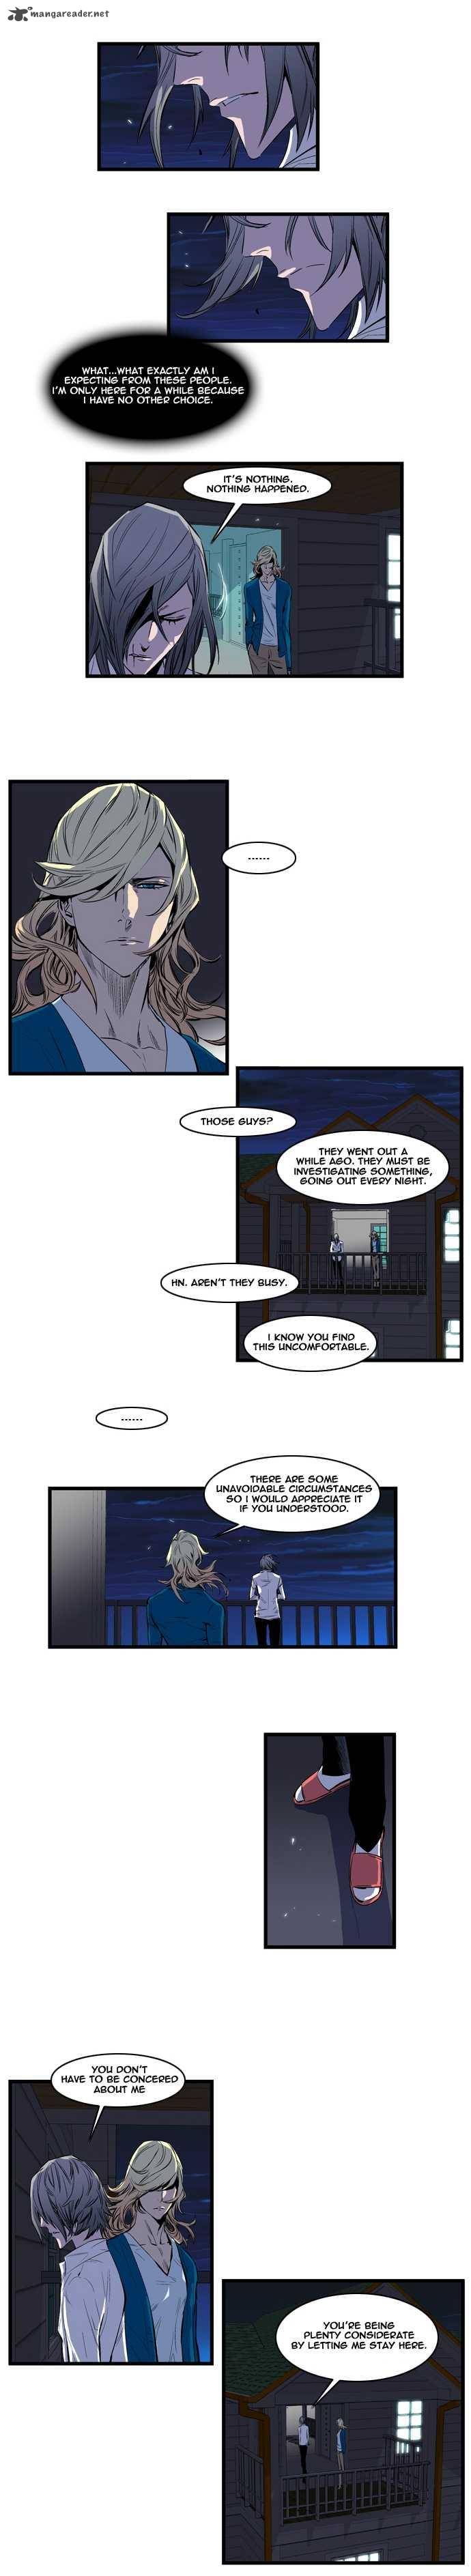 Noblesse Chapter 104 Page 2